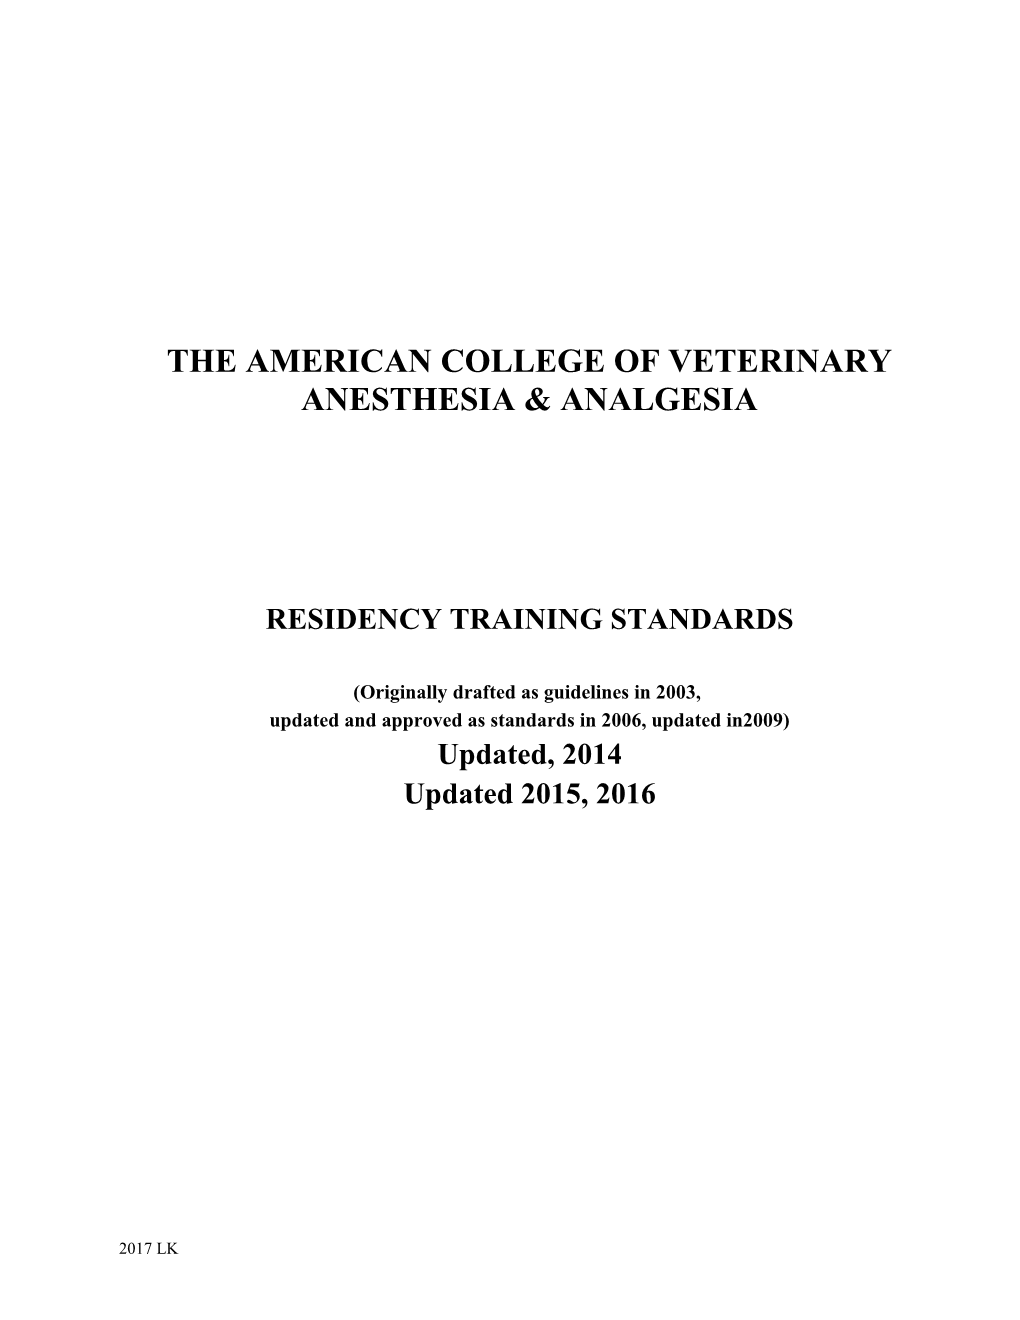 The American College of Veterinary Anesthesiologists